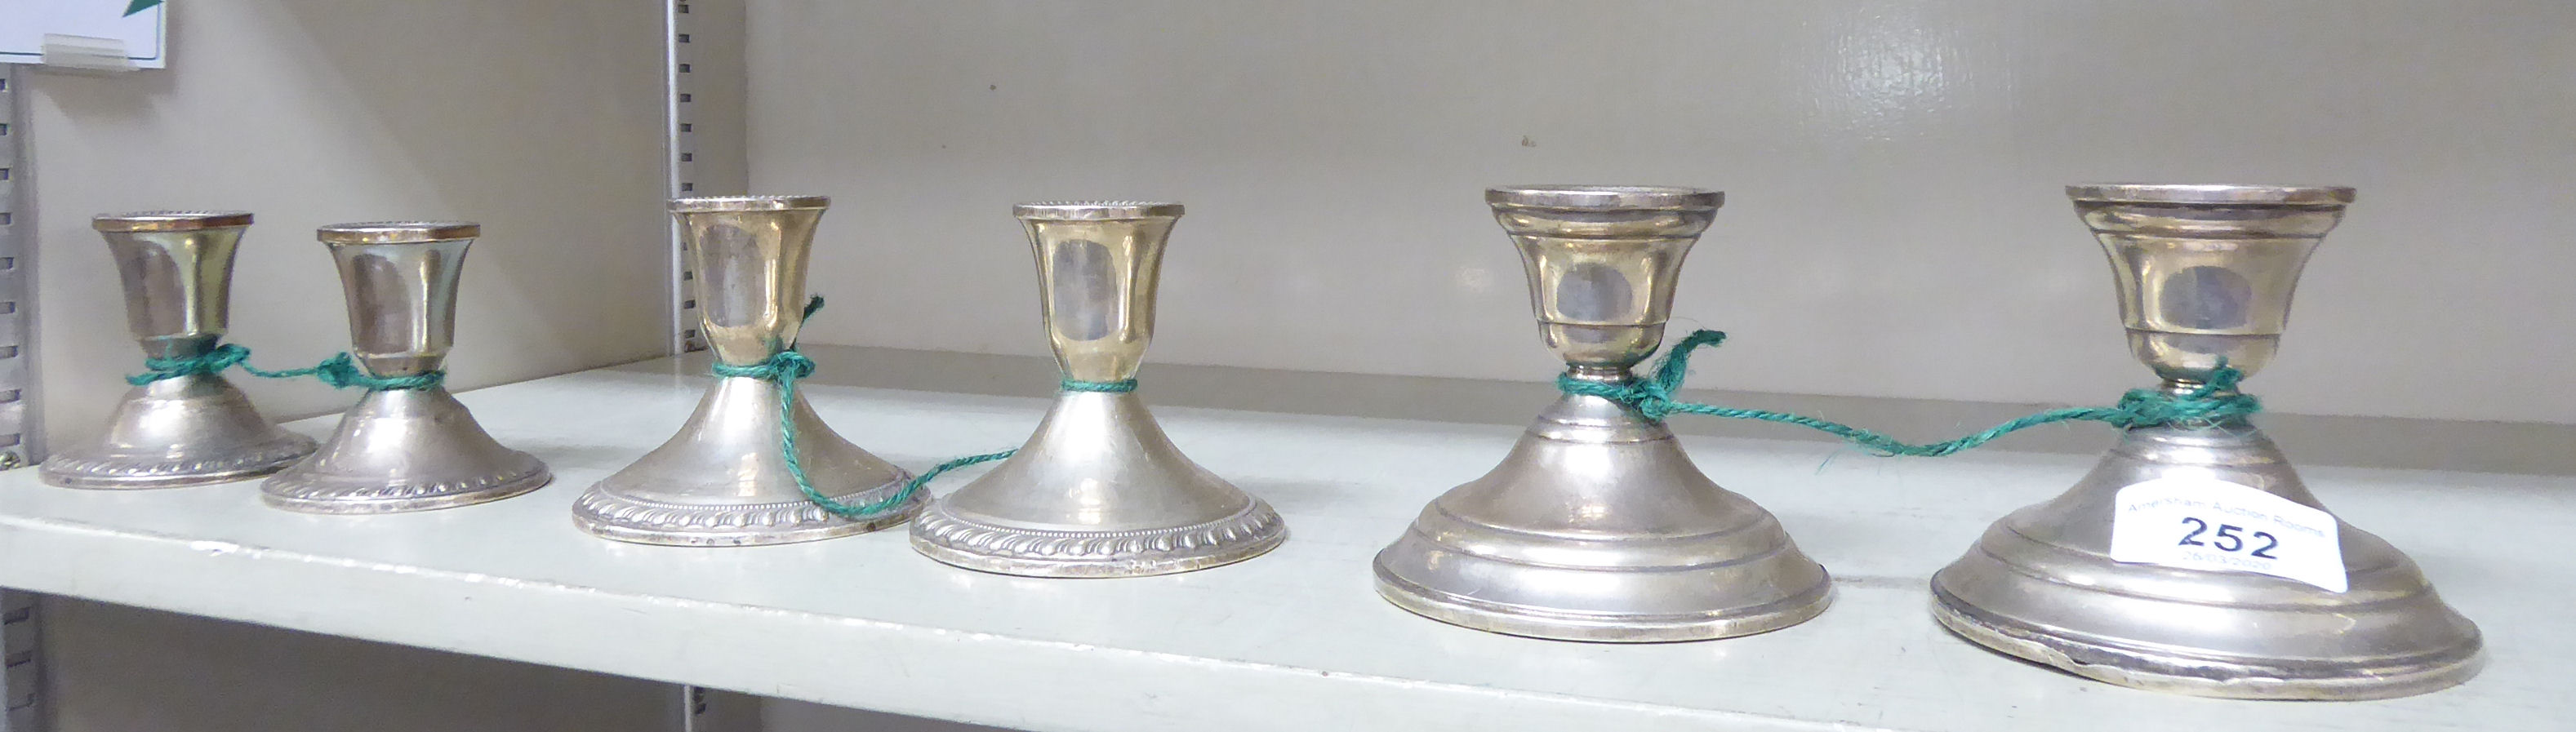 Three pairs of similar Sterling silver dwarf candlesticks 3''-3.